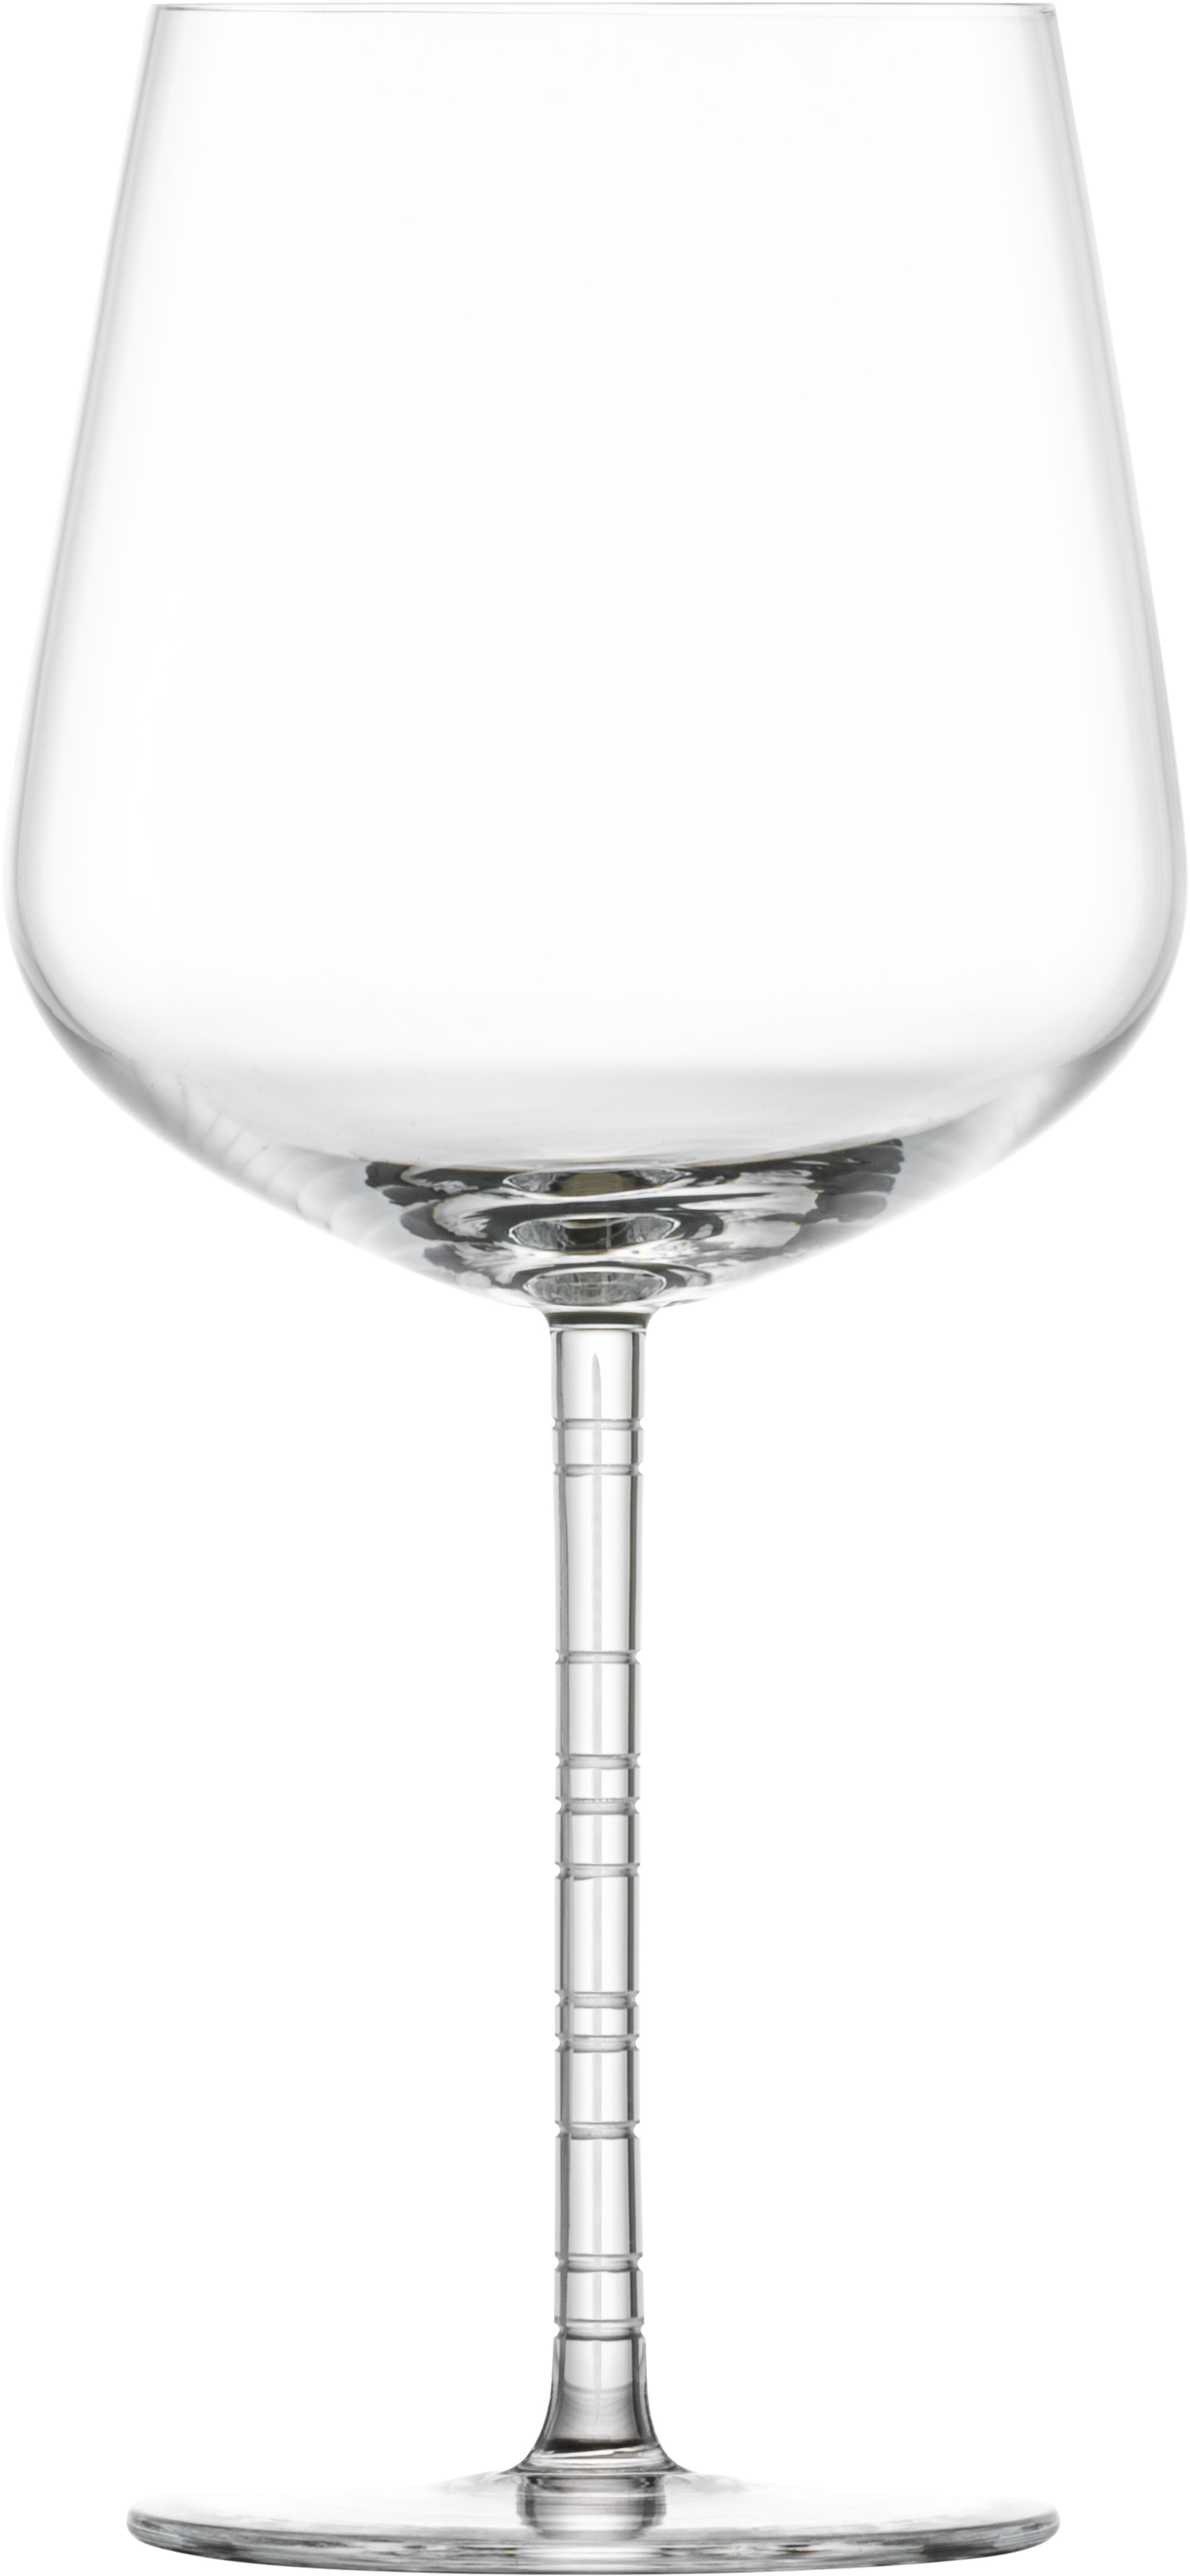 Journey Claret Red Wine Glass 63 cl 2-pack - Zwiesel @ RoyalDesign